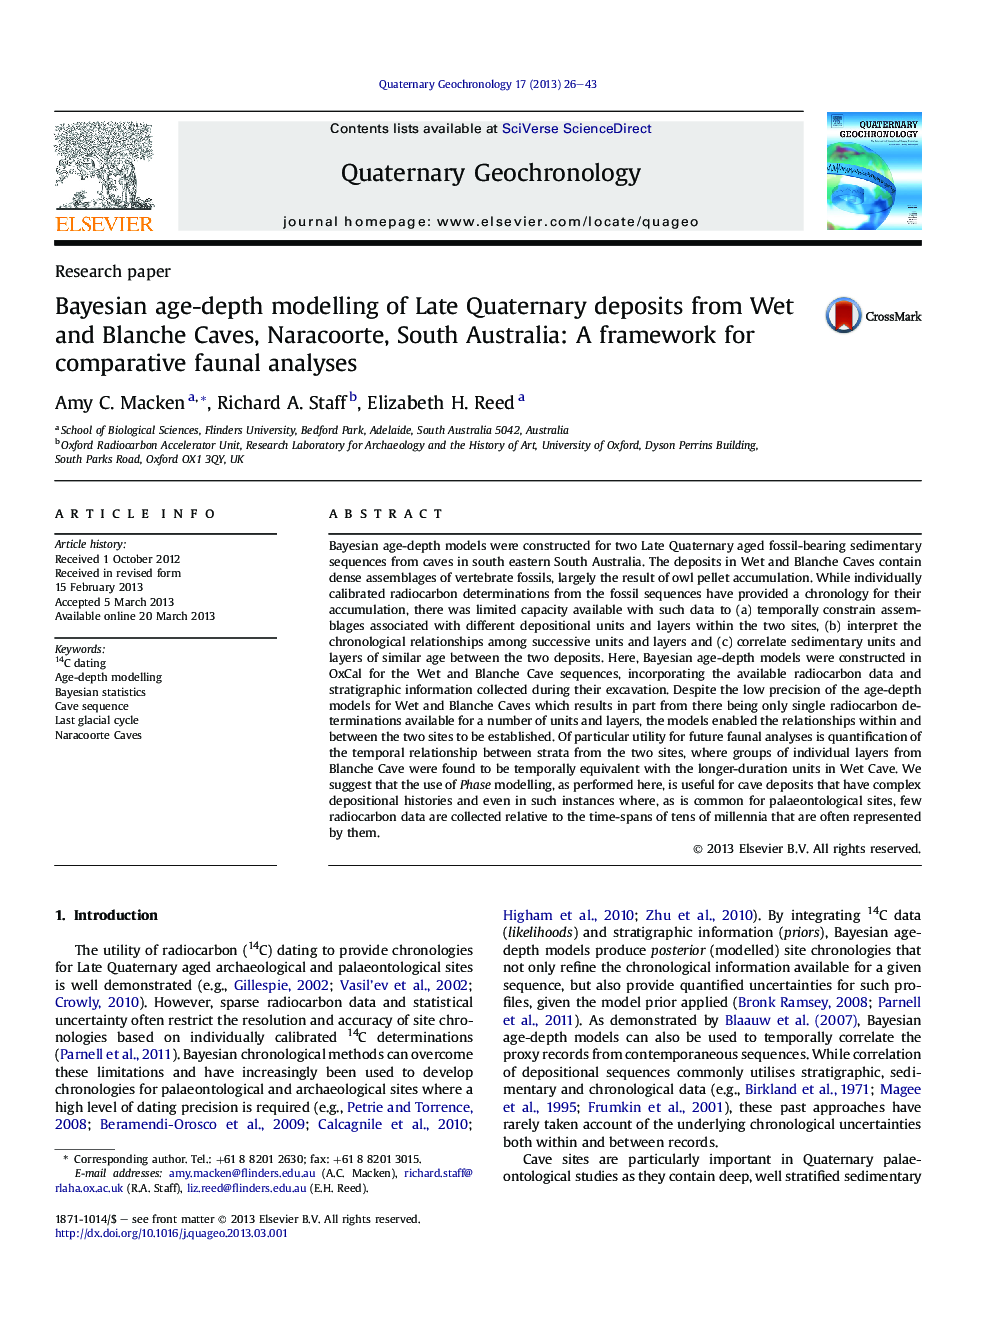 Bayesian age-depth modelling of Late Quaternary deposits from Wet and Blanche Caves, Naracoorte, South Australia: A framework for comparative faunal analyses